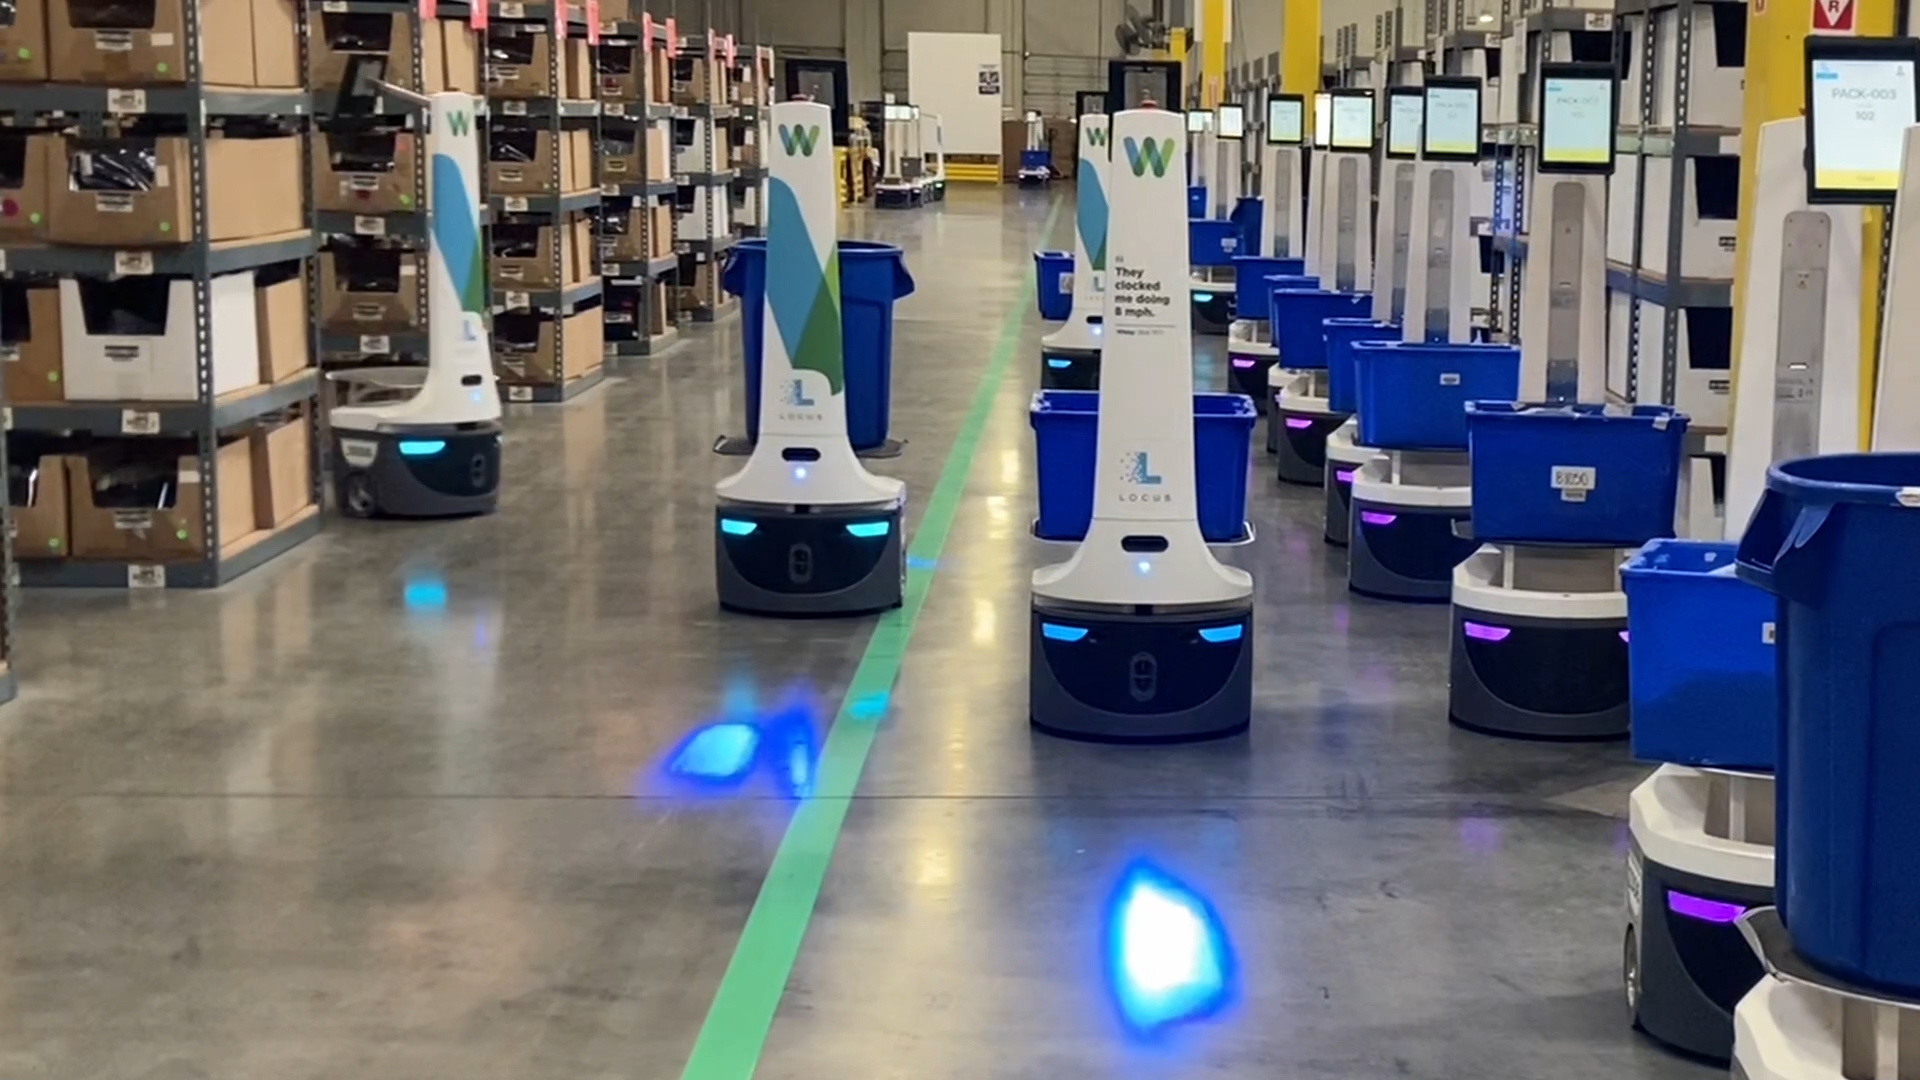 Ryder opens third multiclient omnichannel distribution center in Columbus, Ohio, a key position in the e-commerce race. The facility is part of Ryder's new supply chain offering: Ryder E-Commerce by Whiplash, supported by best-in-class technology and a proven operating platform.